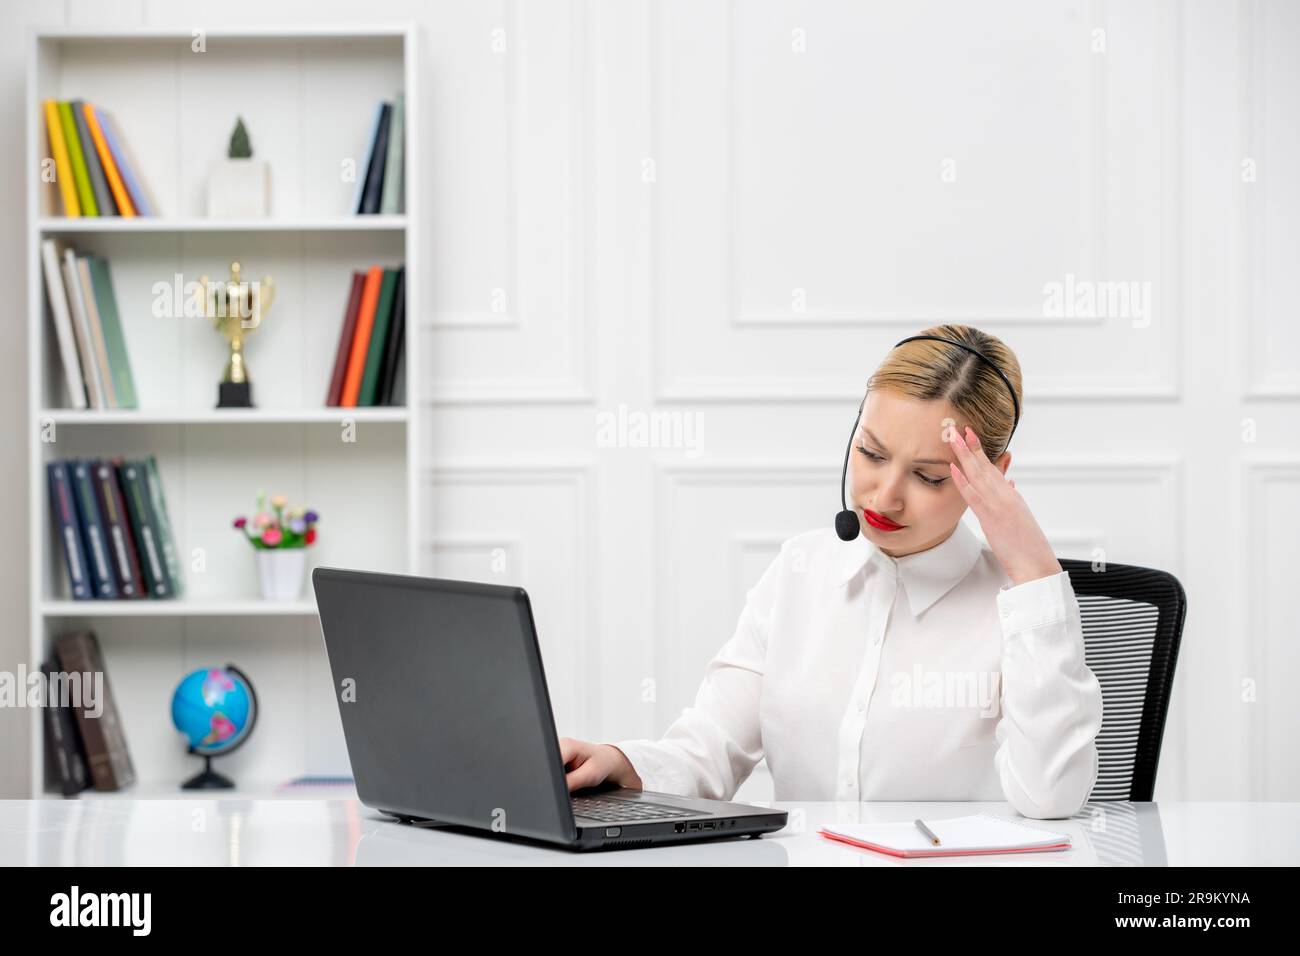 customer service cute blonde girl office shirt with headset and computer touching head tired Stock Photo